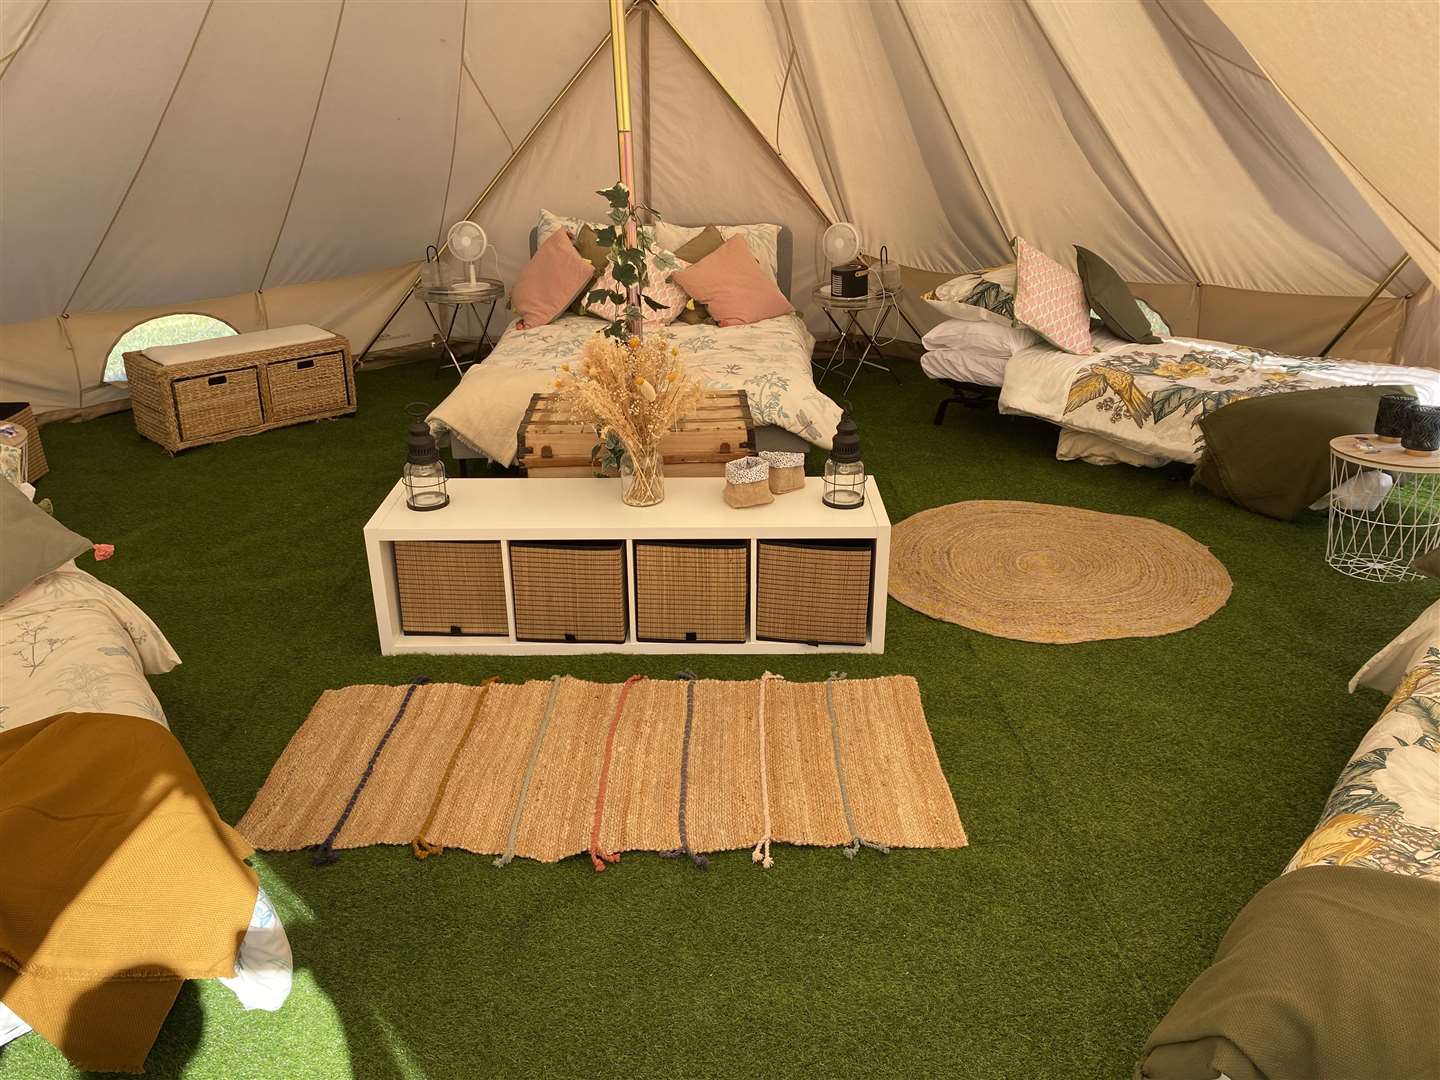 They offer overnight stays in a luxury glamping bell tent which sleeps up to six people